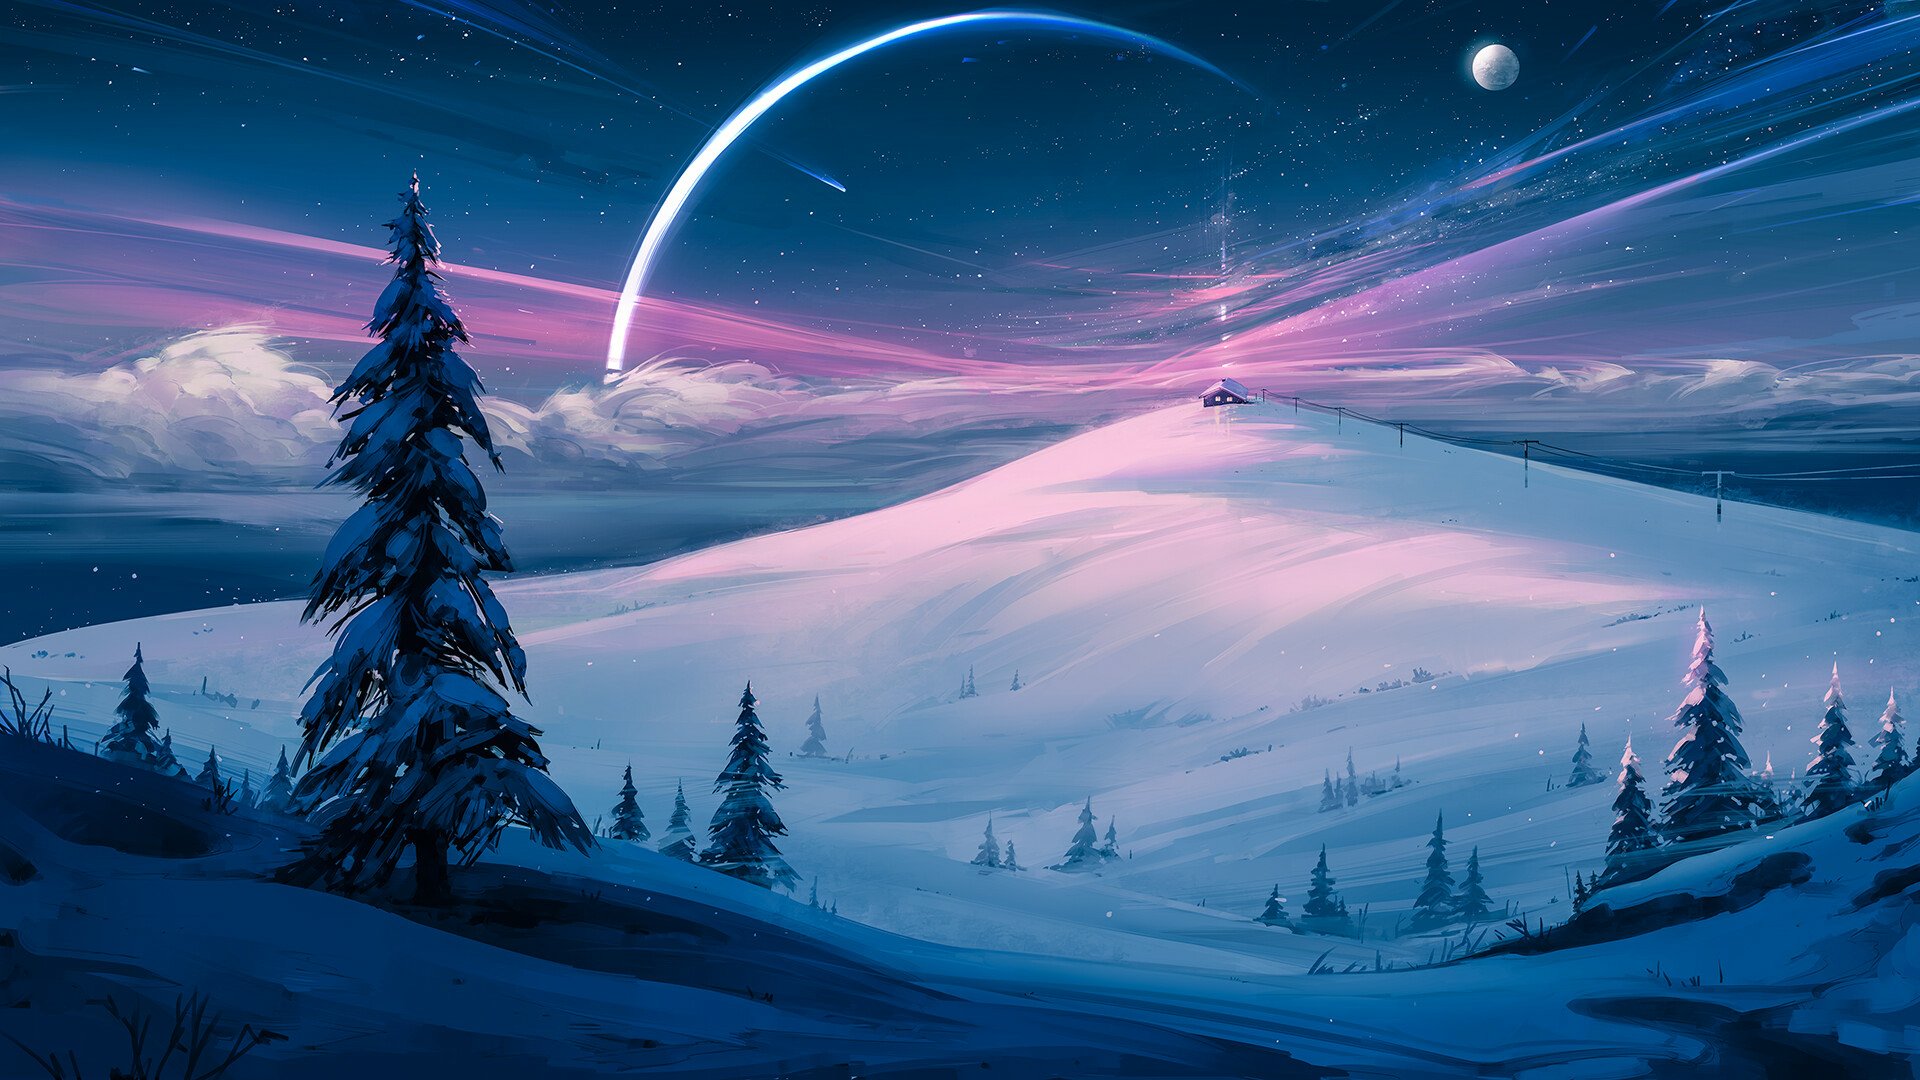 Stardust By Alena Aenami HD Wallpaper Background Image